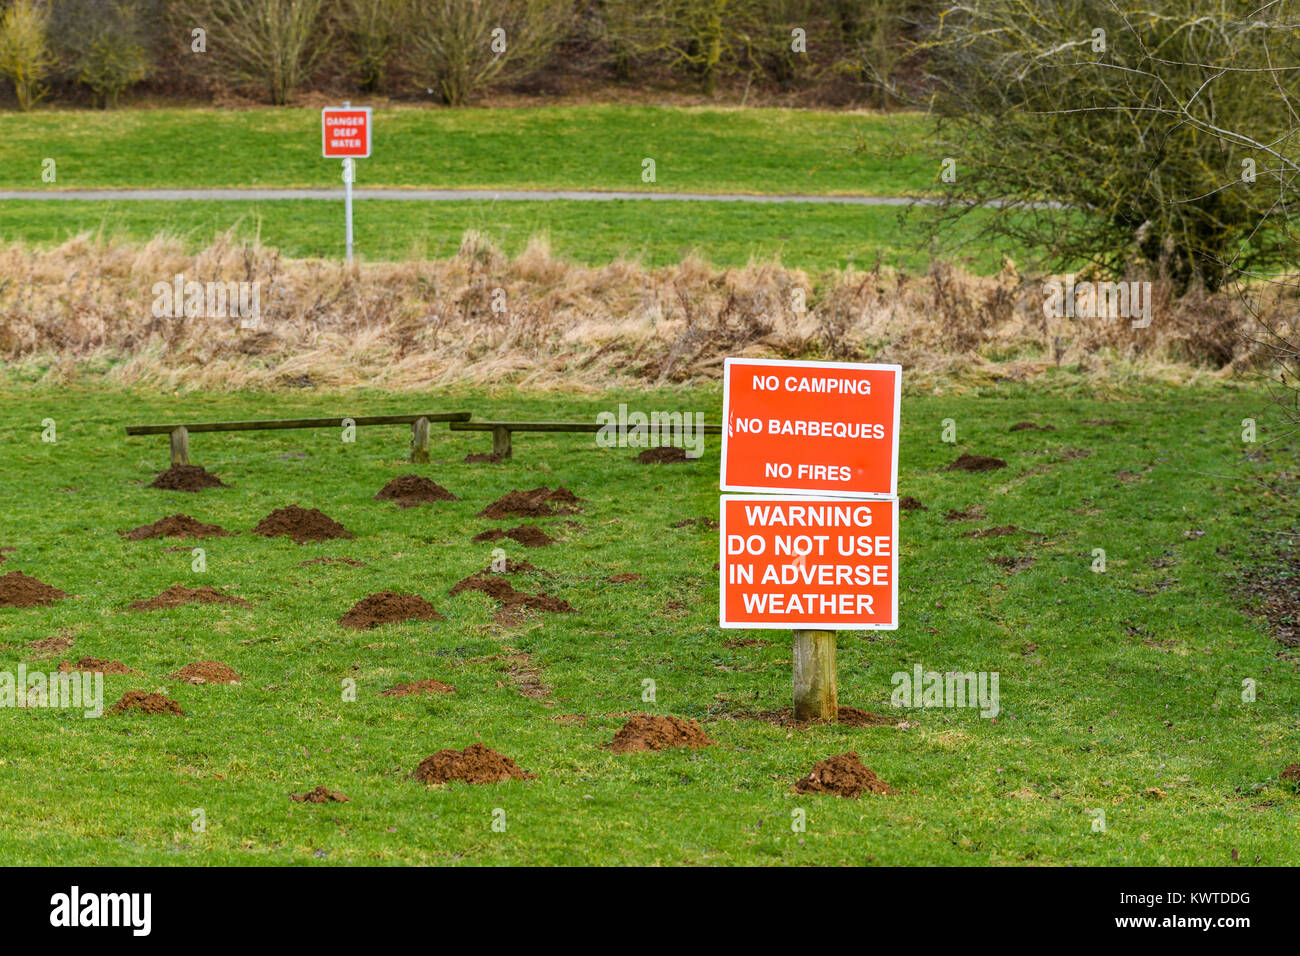 Red sign forbidding barbecues, camping, fires Stock Photo